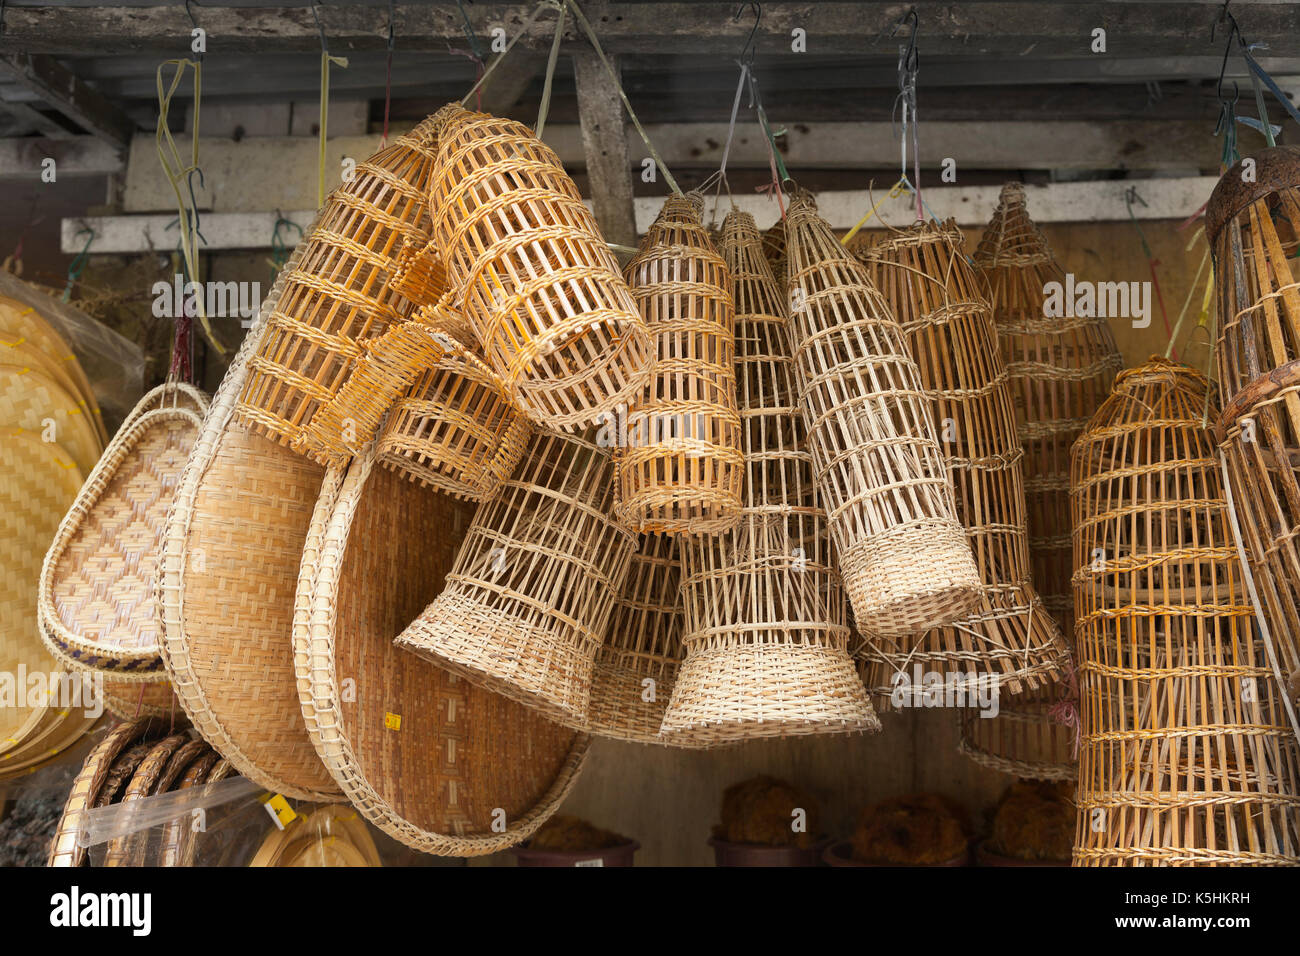 Rattan craftwork for sale in a market stall, Cameron Highlands, Malaysia Stock Photo